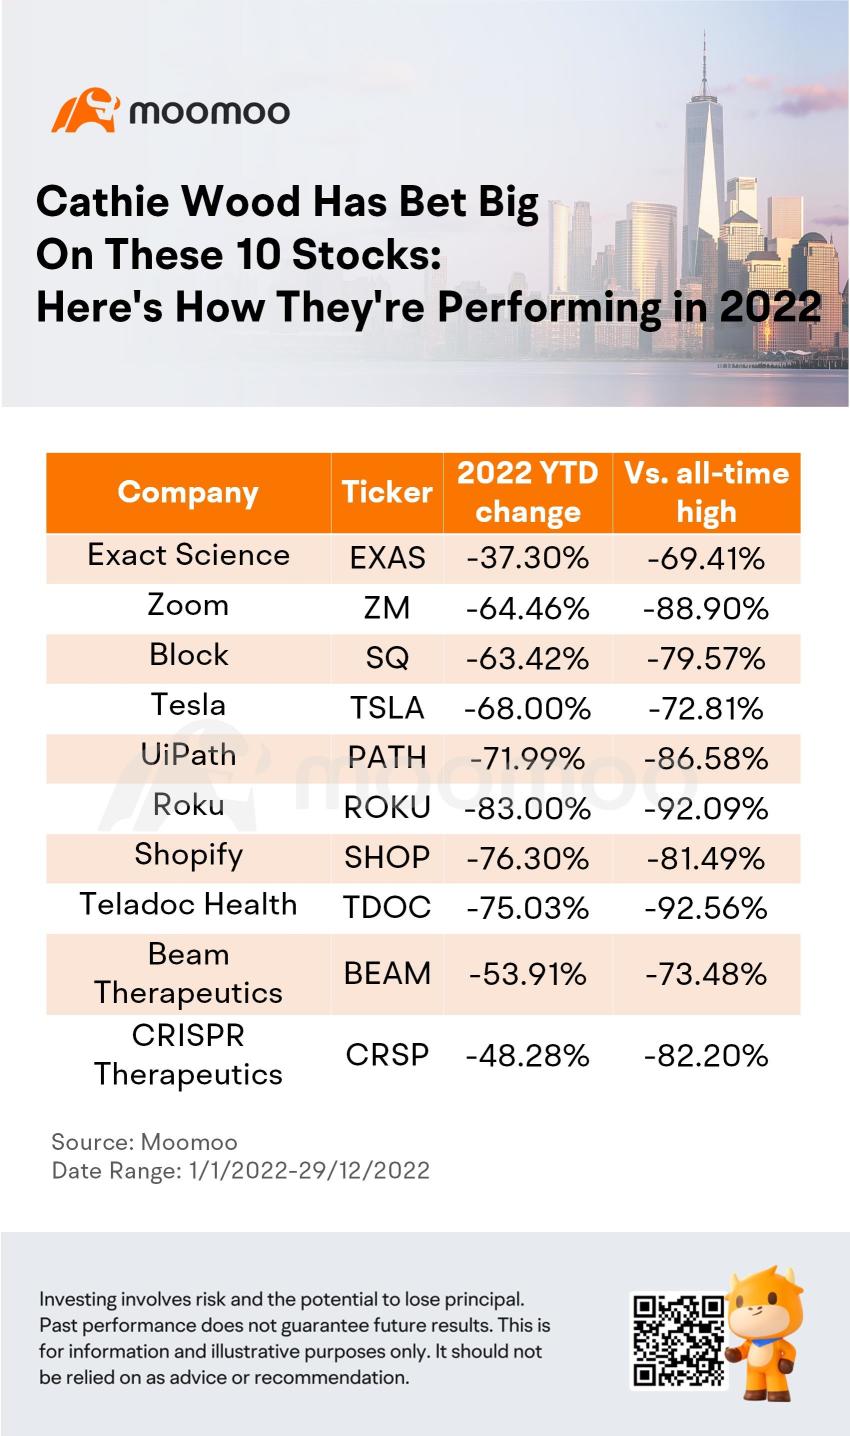 Cathie Wood Has Bet Big On These 10 Stocks: Here's How They're Performing in 2022